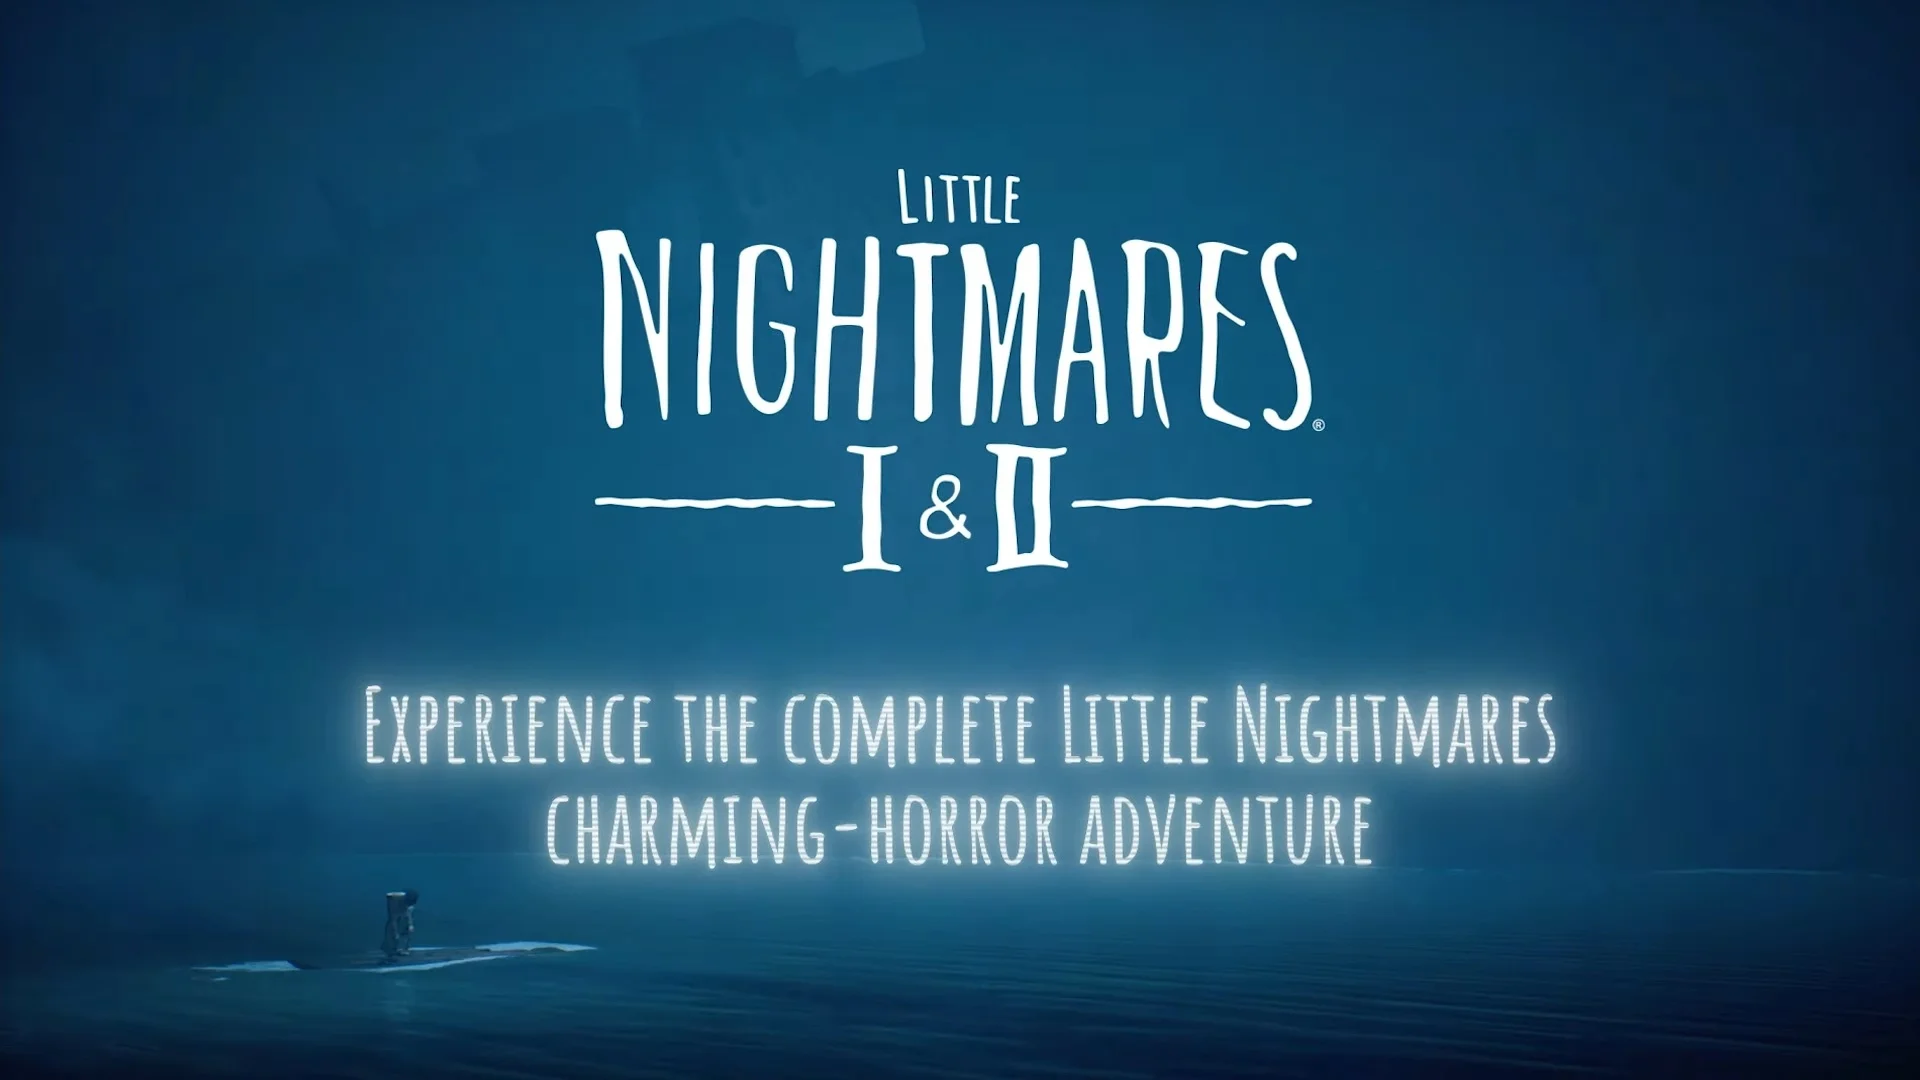 The Little Nightmares Franchise